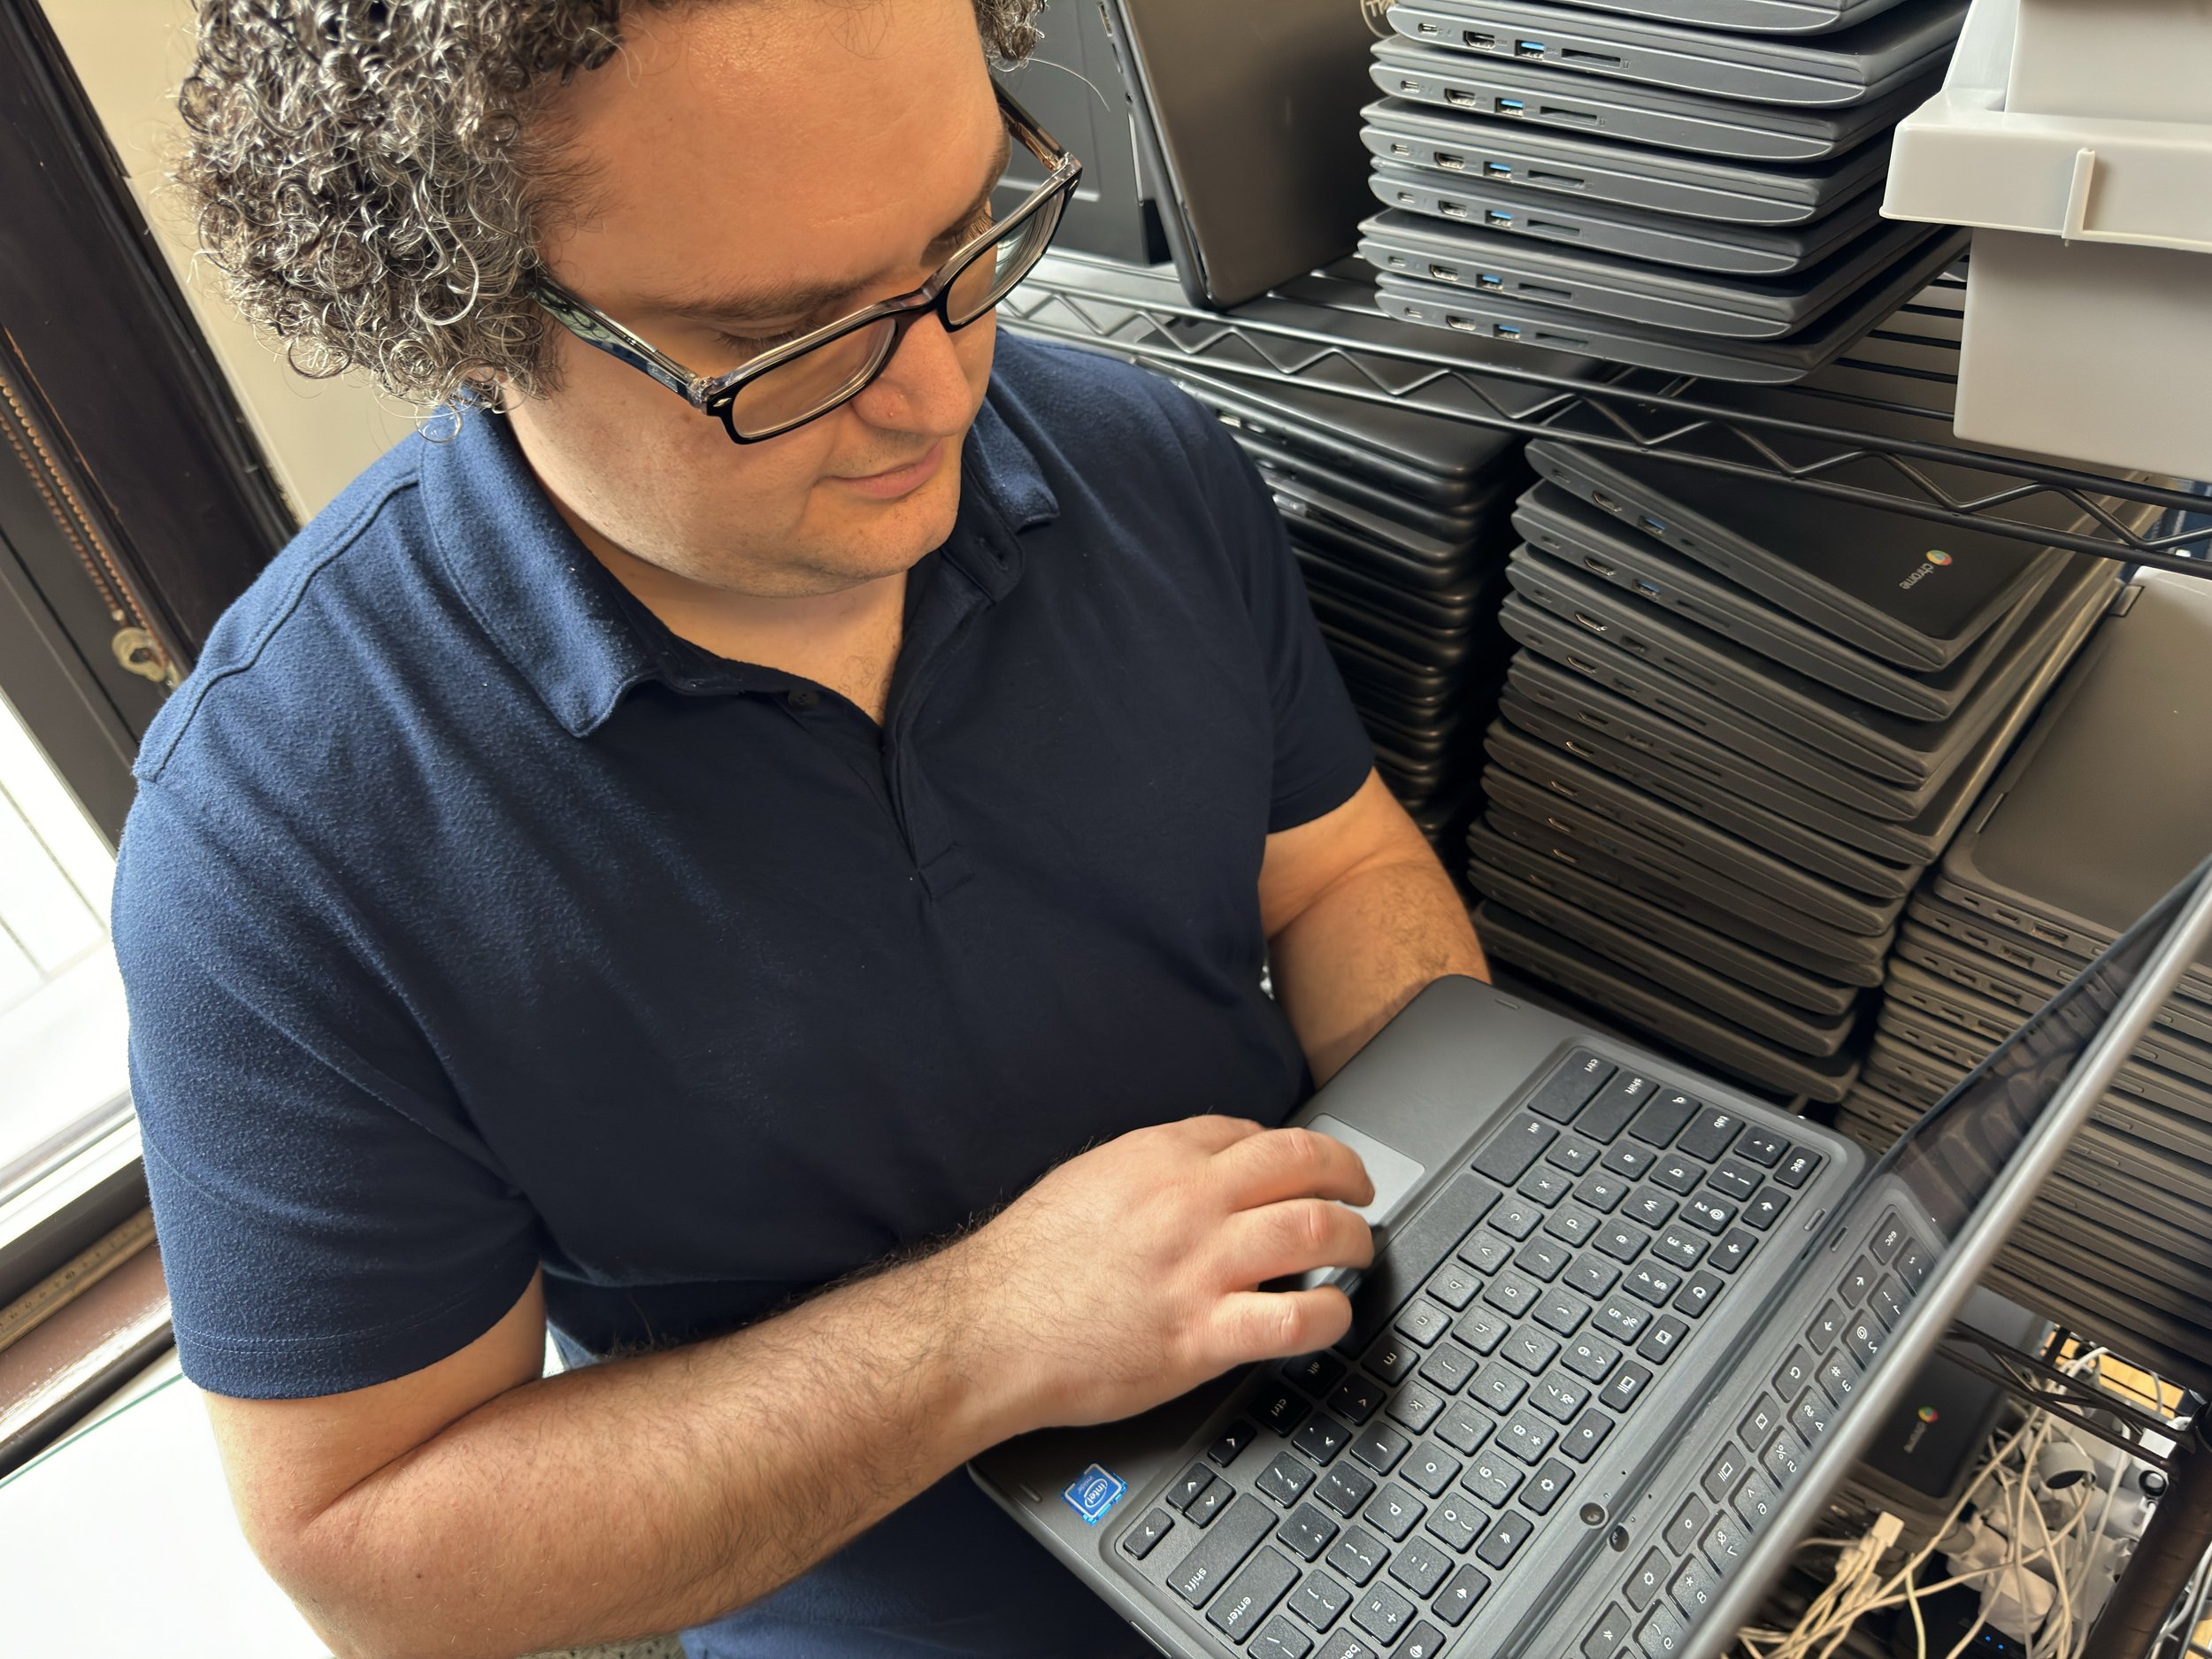  Tony stands holding a Chromebook and looks at the screen.  There are stacks of many other Chromebooks next to him. 